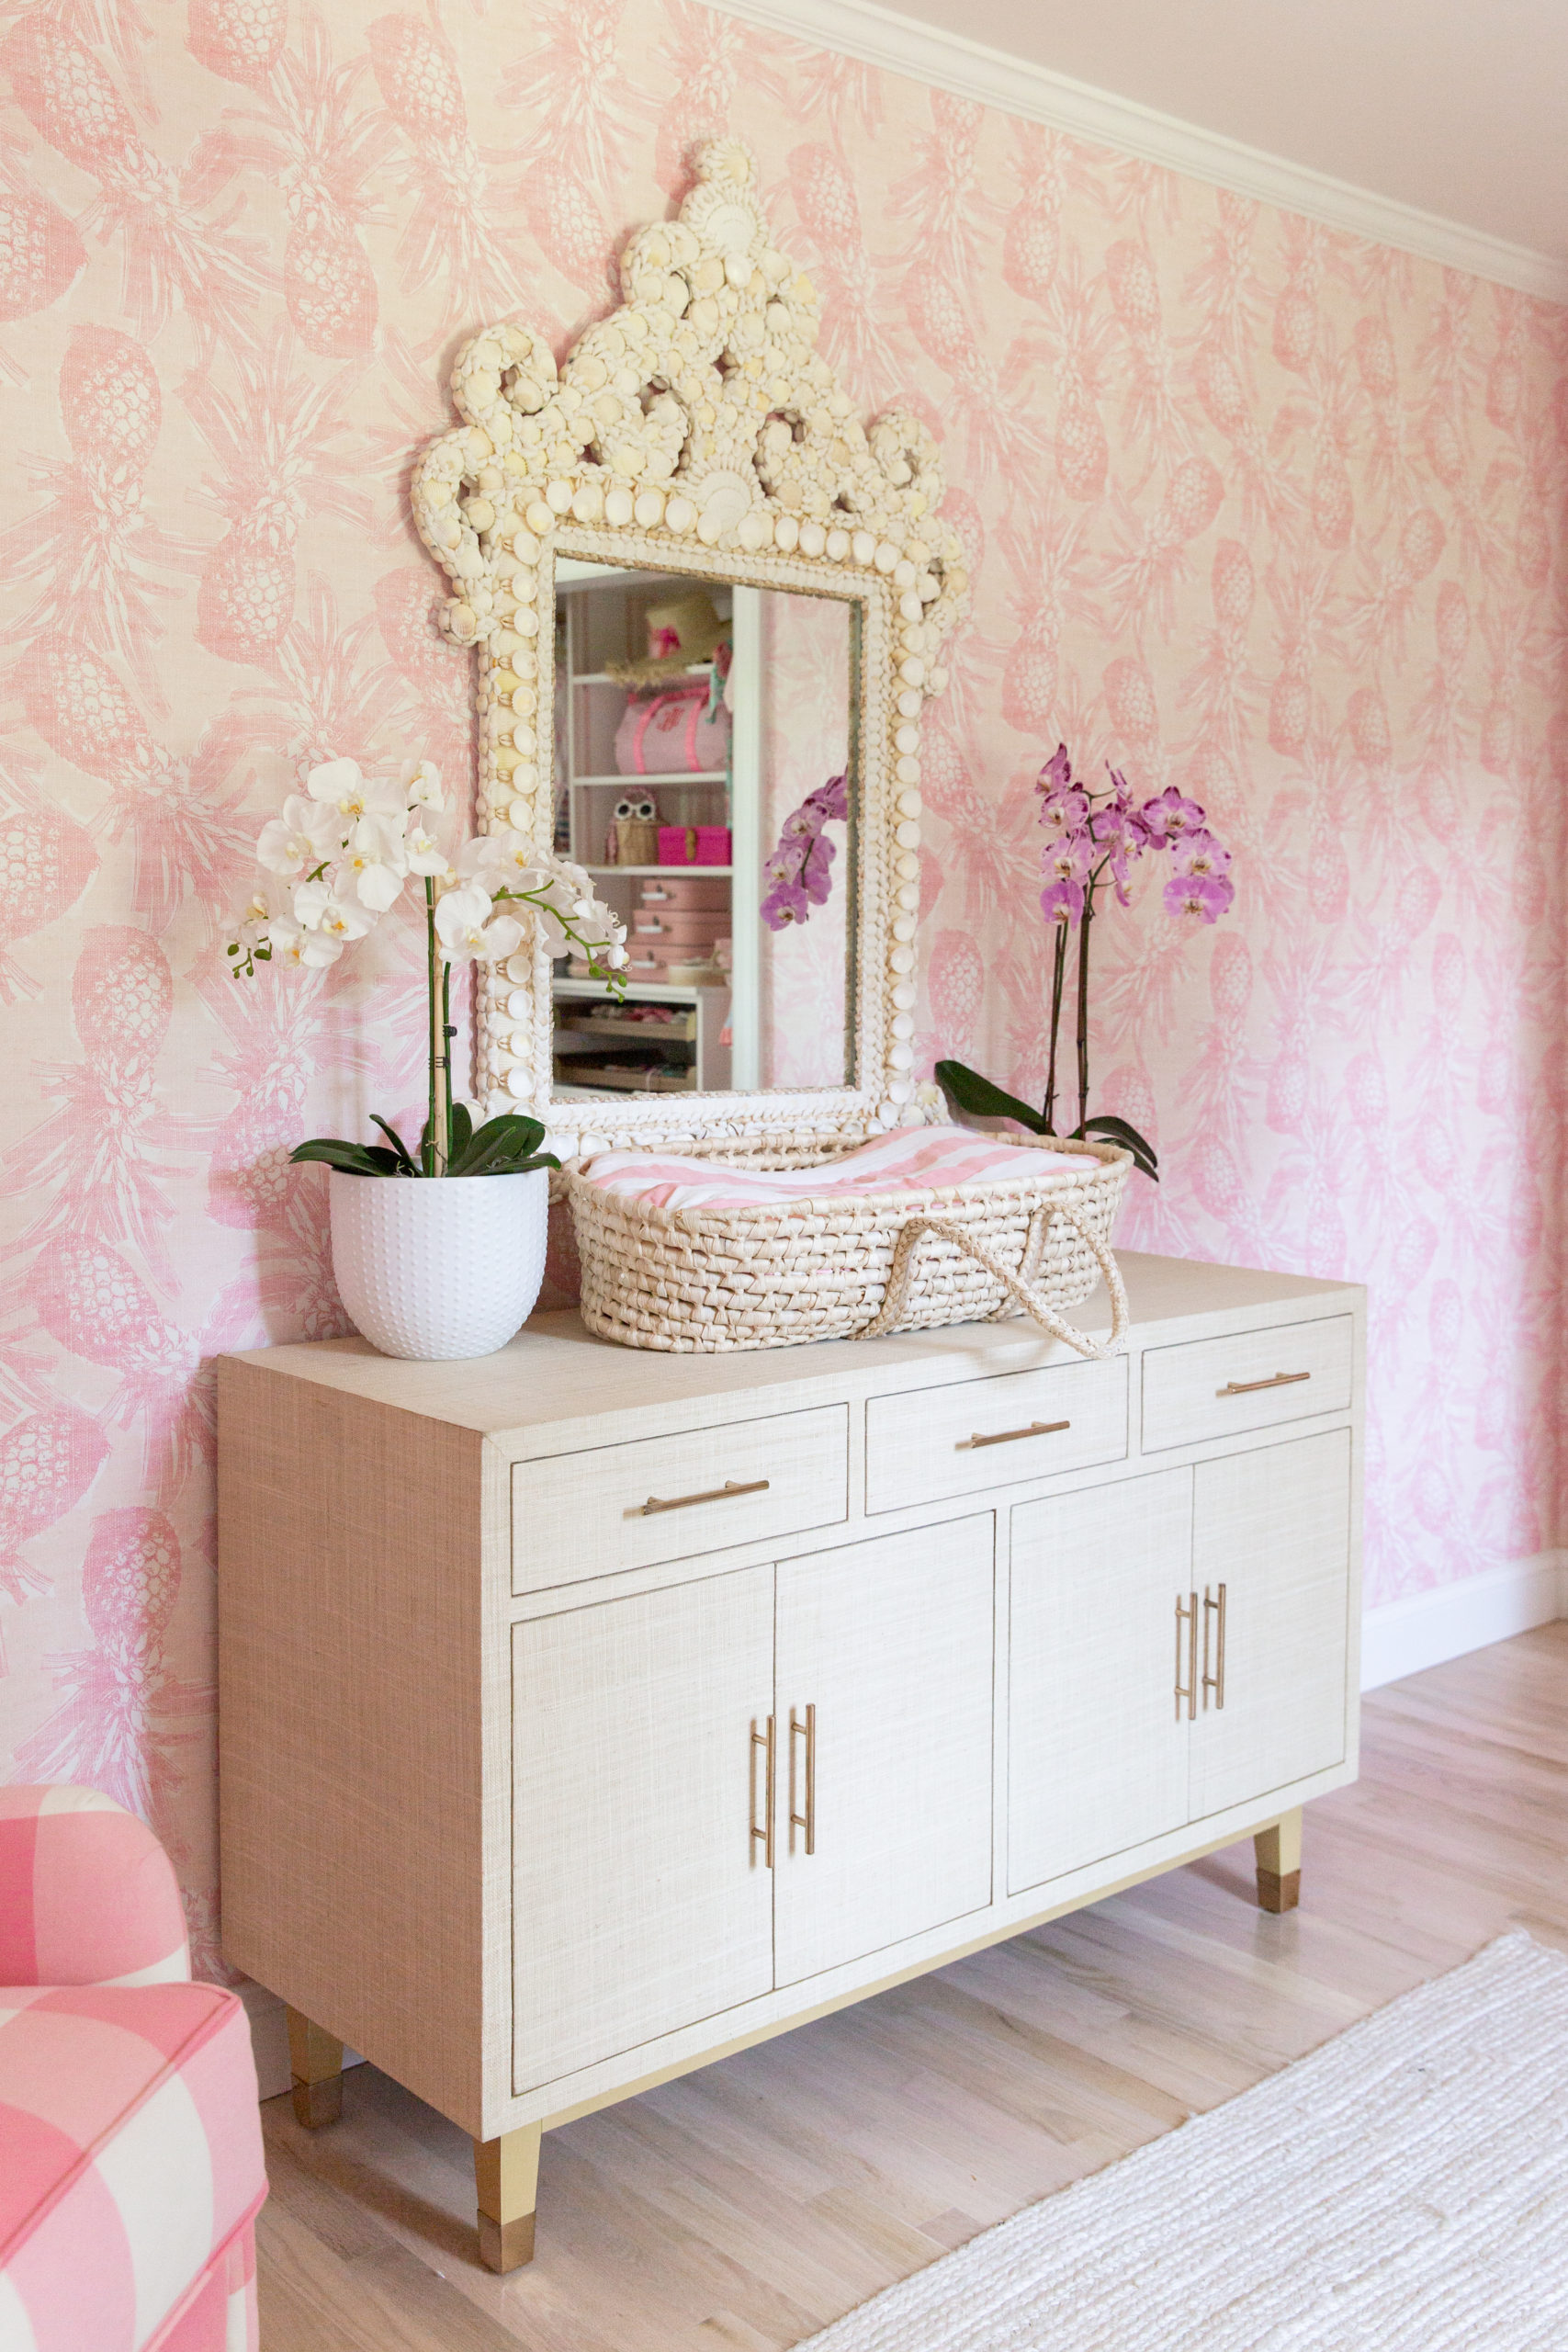 McKenna Bleu Coastal Nursery with Credenza as Changing Table and Shell Mirror